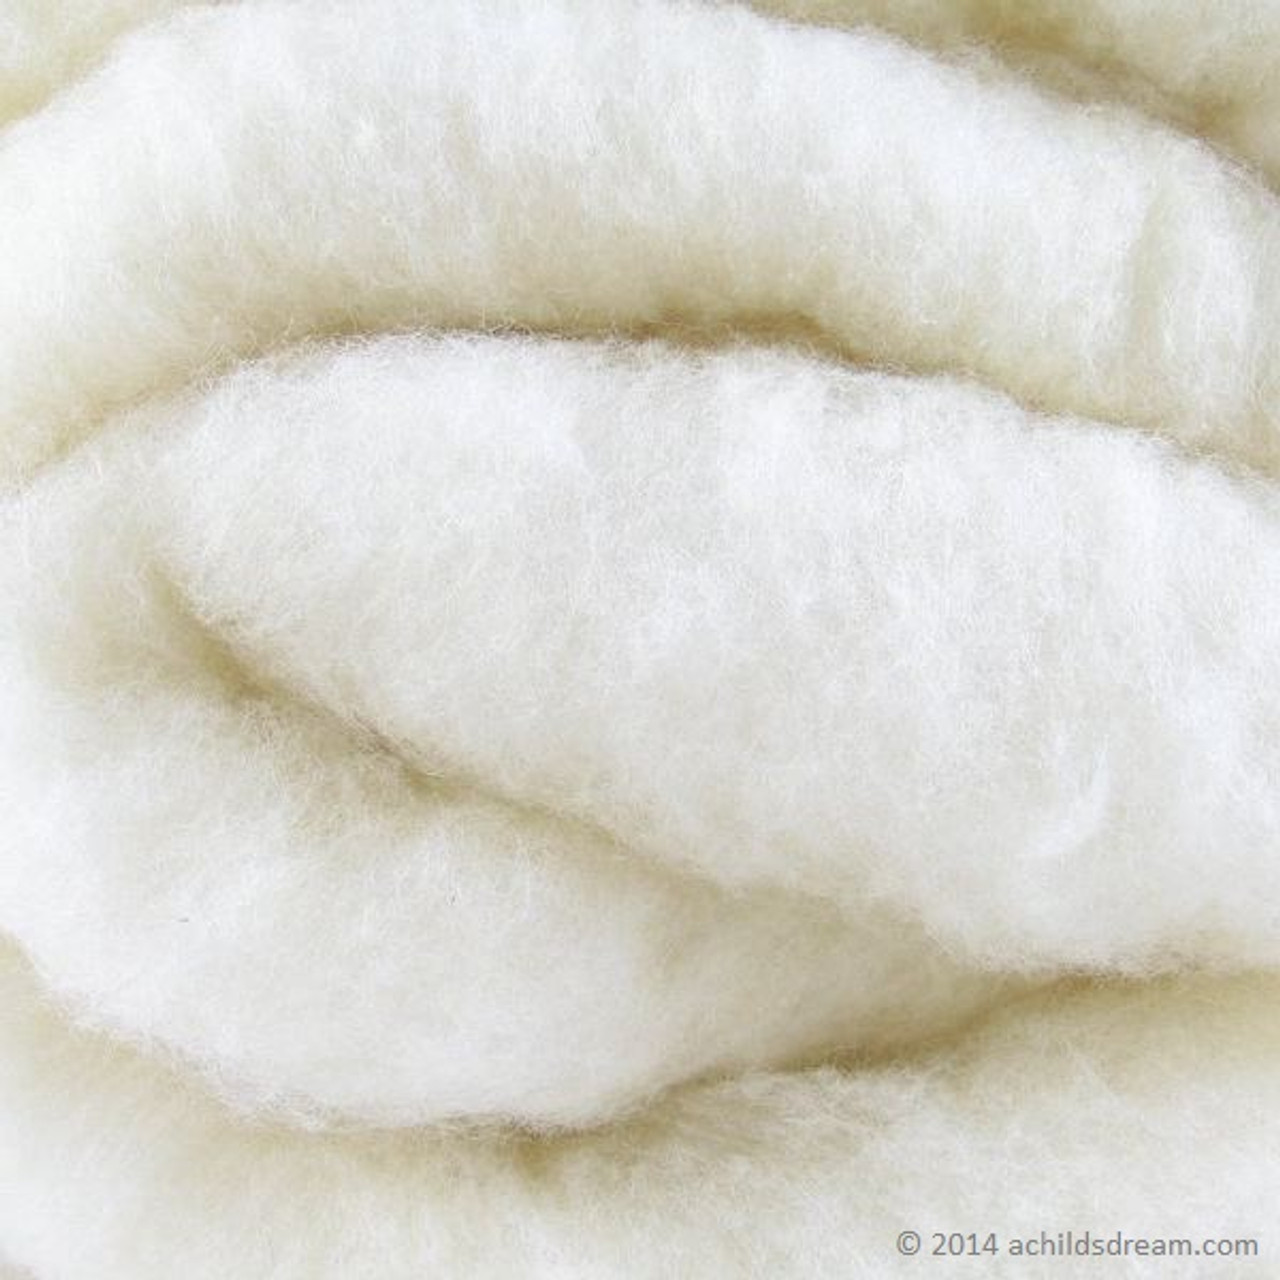 Eco Wool Batting - Waldorf doll and toy stuffing, felting core wool - A  Child's Dream